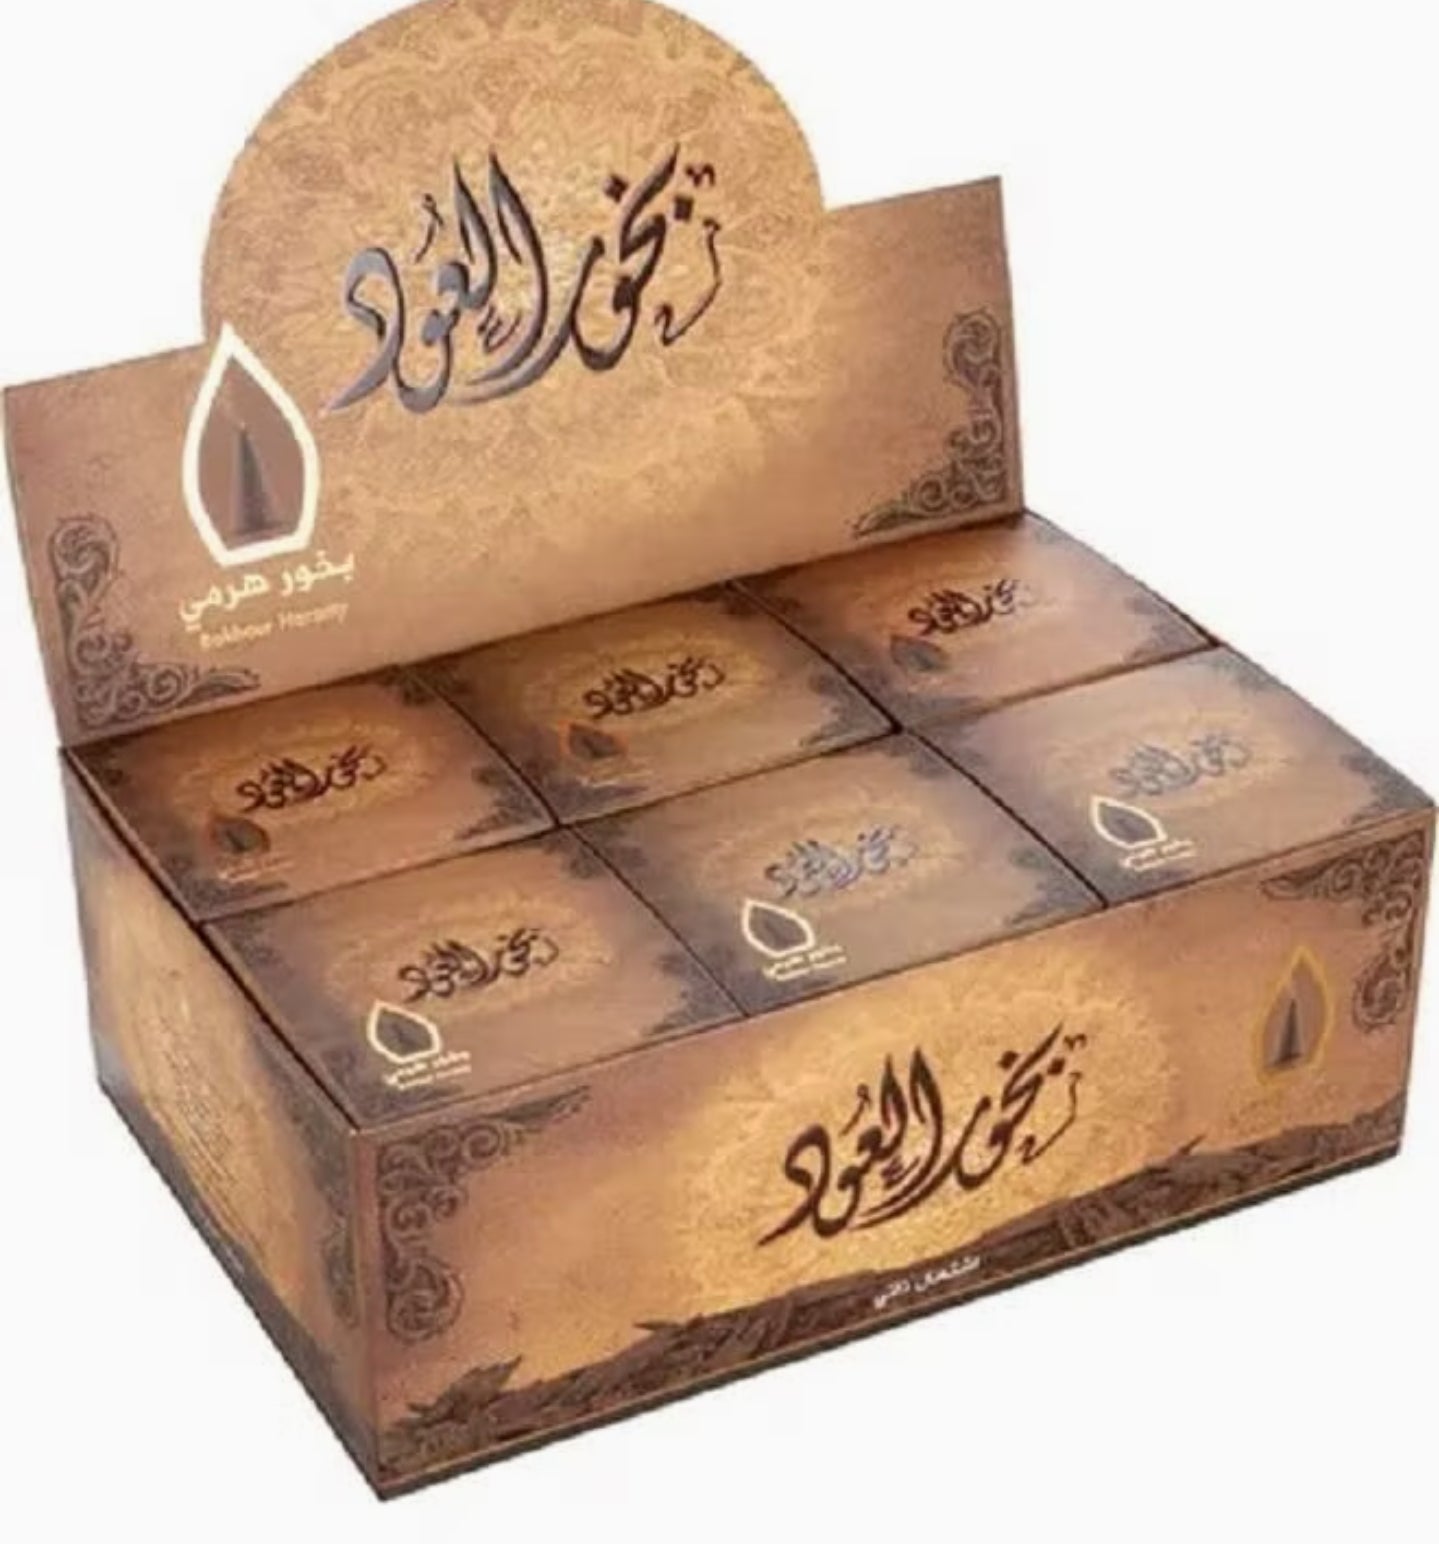 Bakhoor Oud is one of the most incredible fragrances and has been introduced in households over the years. It is mainly chosen for essential occasions like welcoming guests, weddings, or even special moments in love. Both men and women use the fragrance, and it provides an exotic scent to clothing, home, office and in car. 